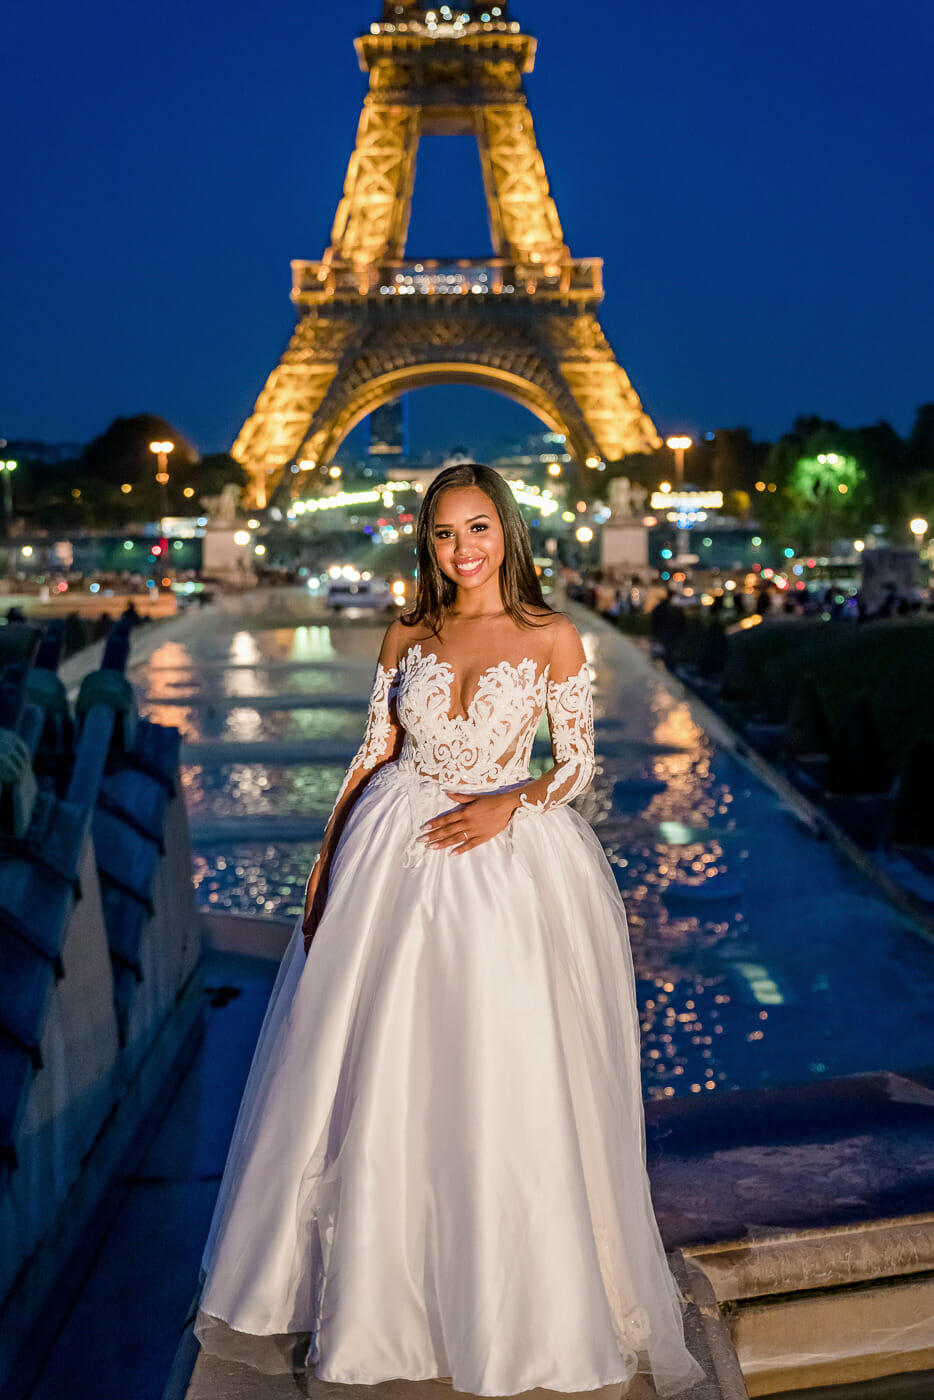 quinceanera photography paris at the Eiffel Tower during the Blue Hour